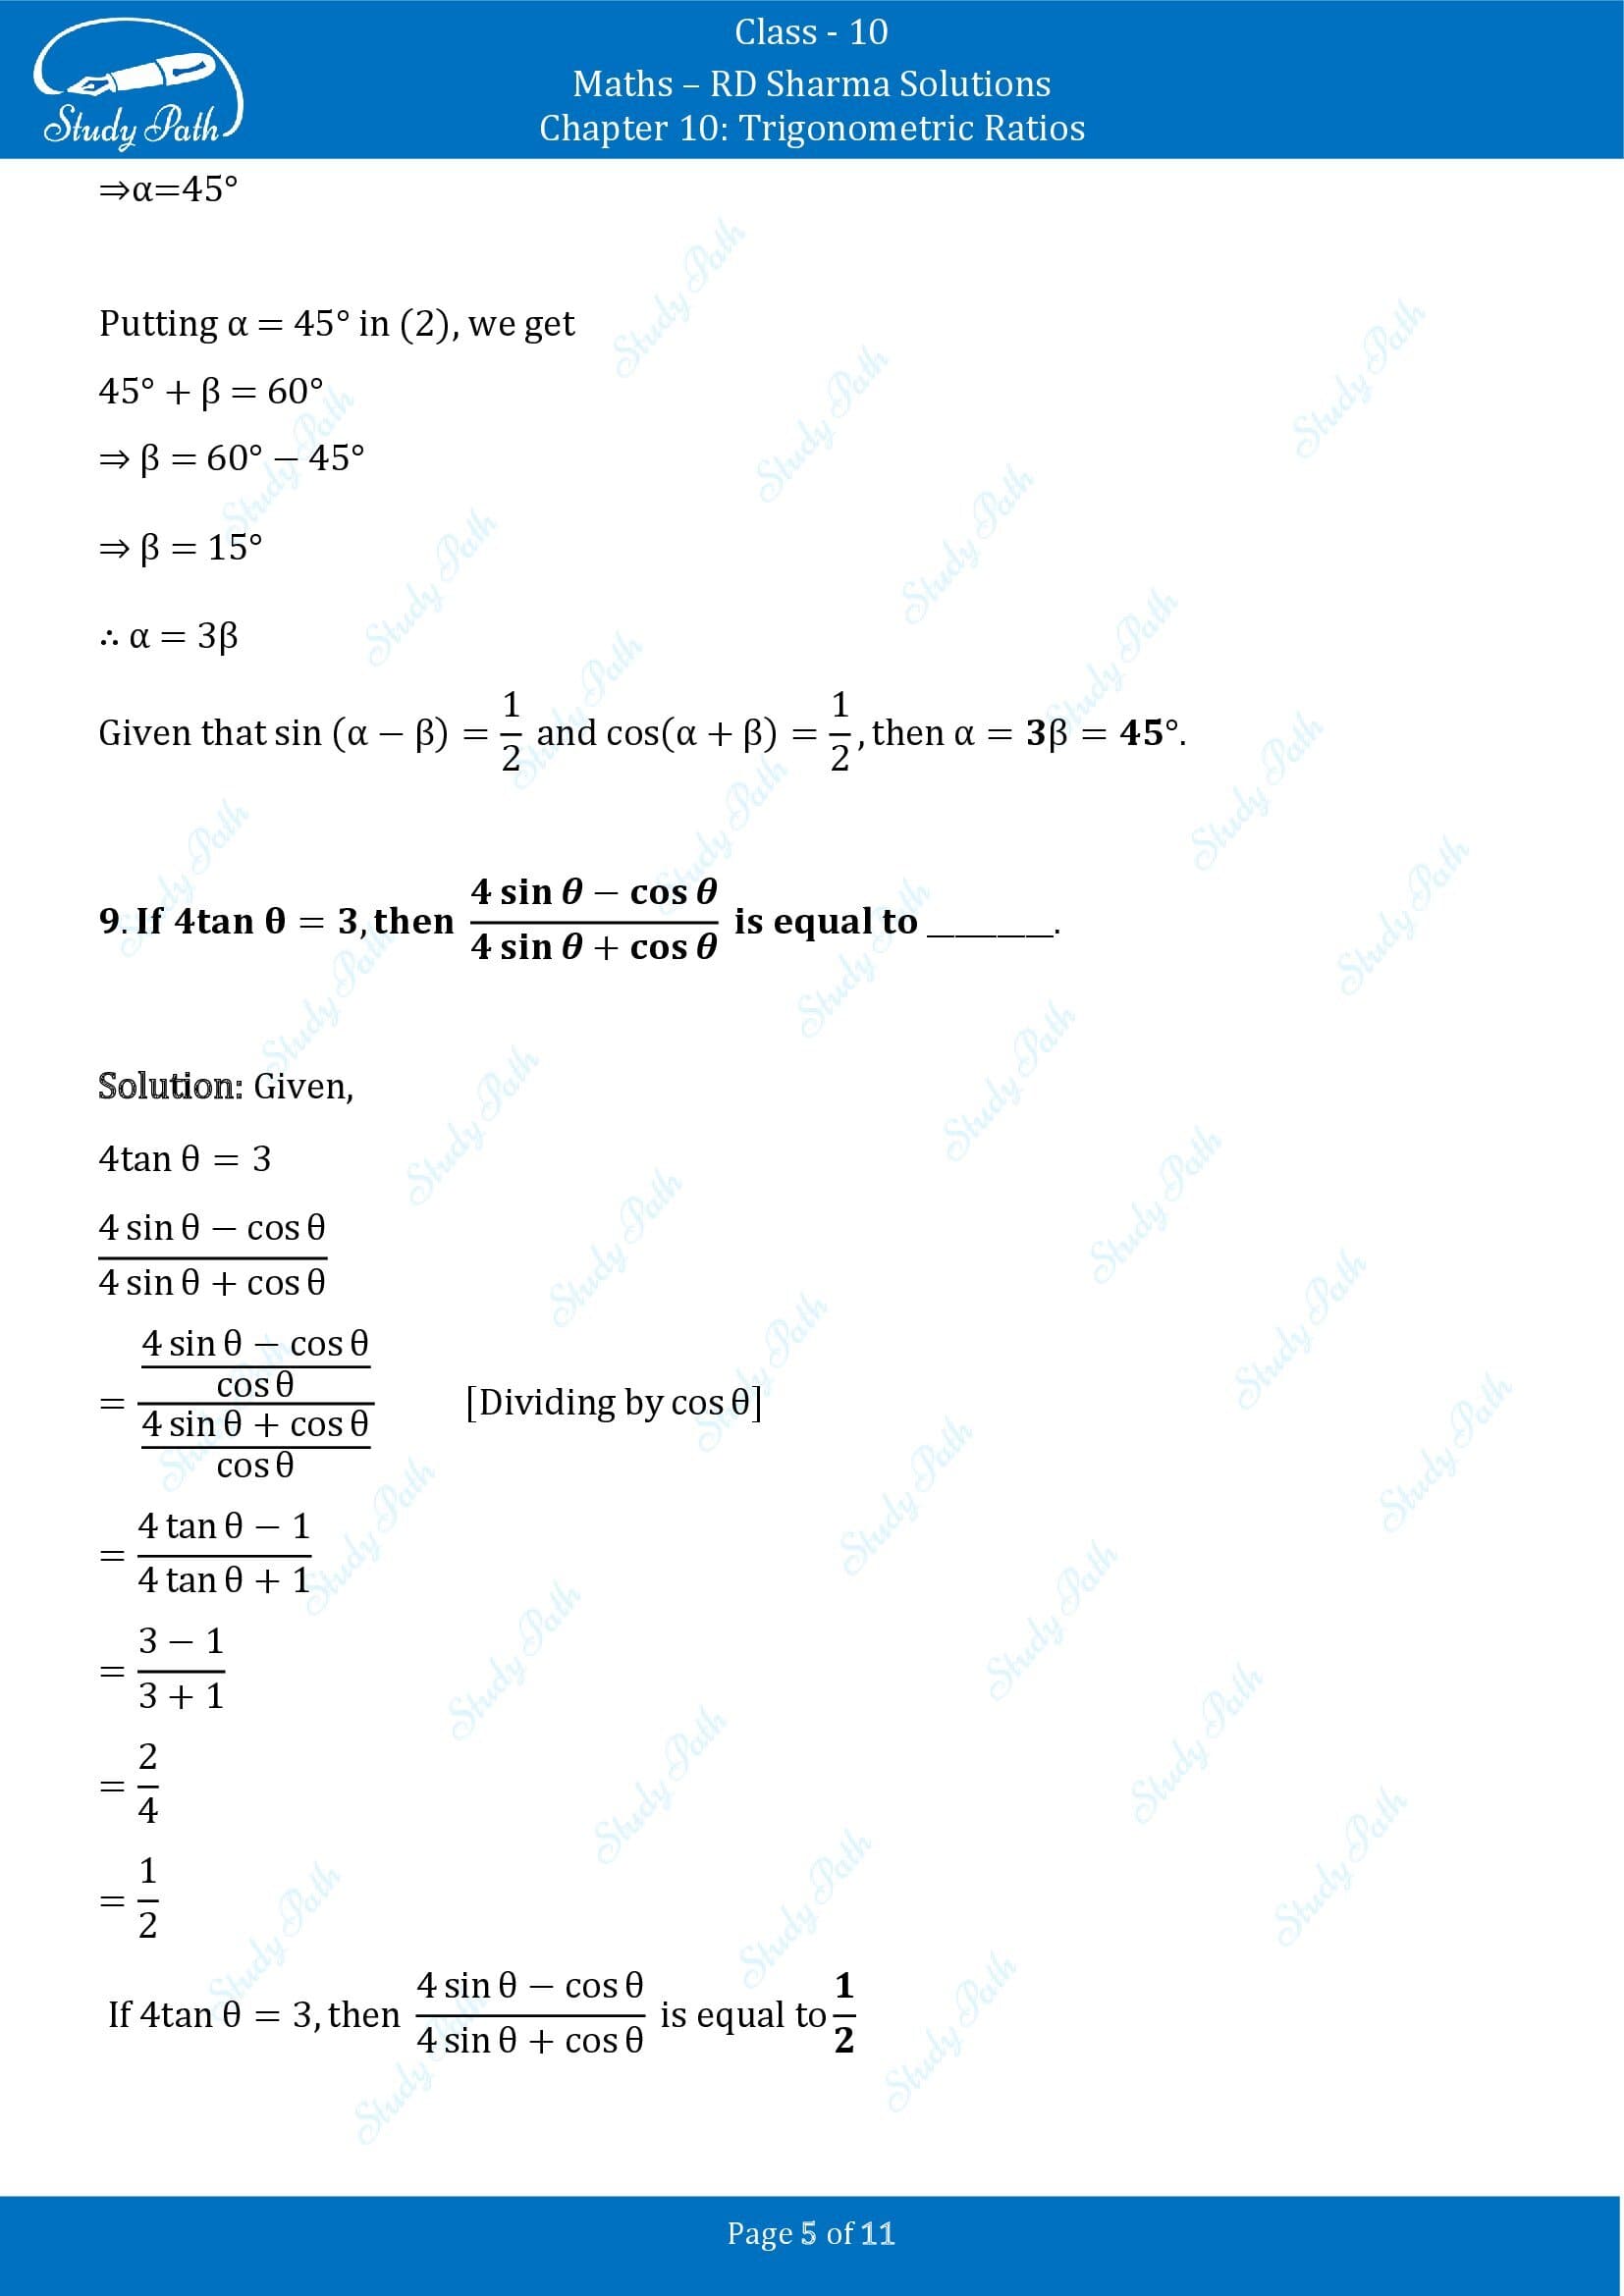 RD Sharma Solutions Class 10 Chapter 10 Trigonometric Ratios Fill in the Blank Type Questions FBQs 00005